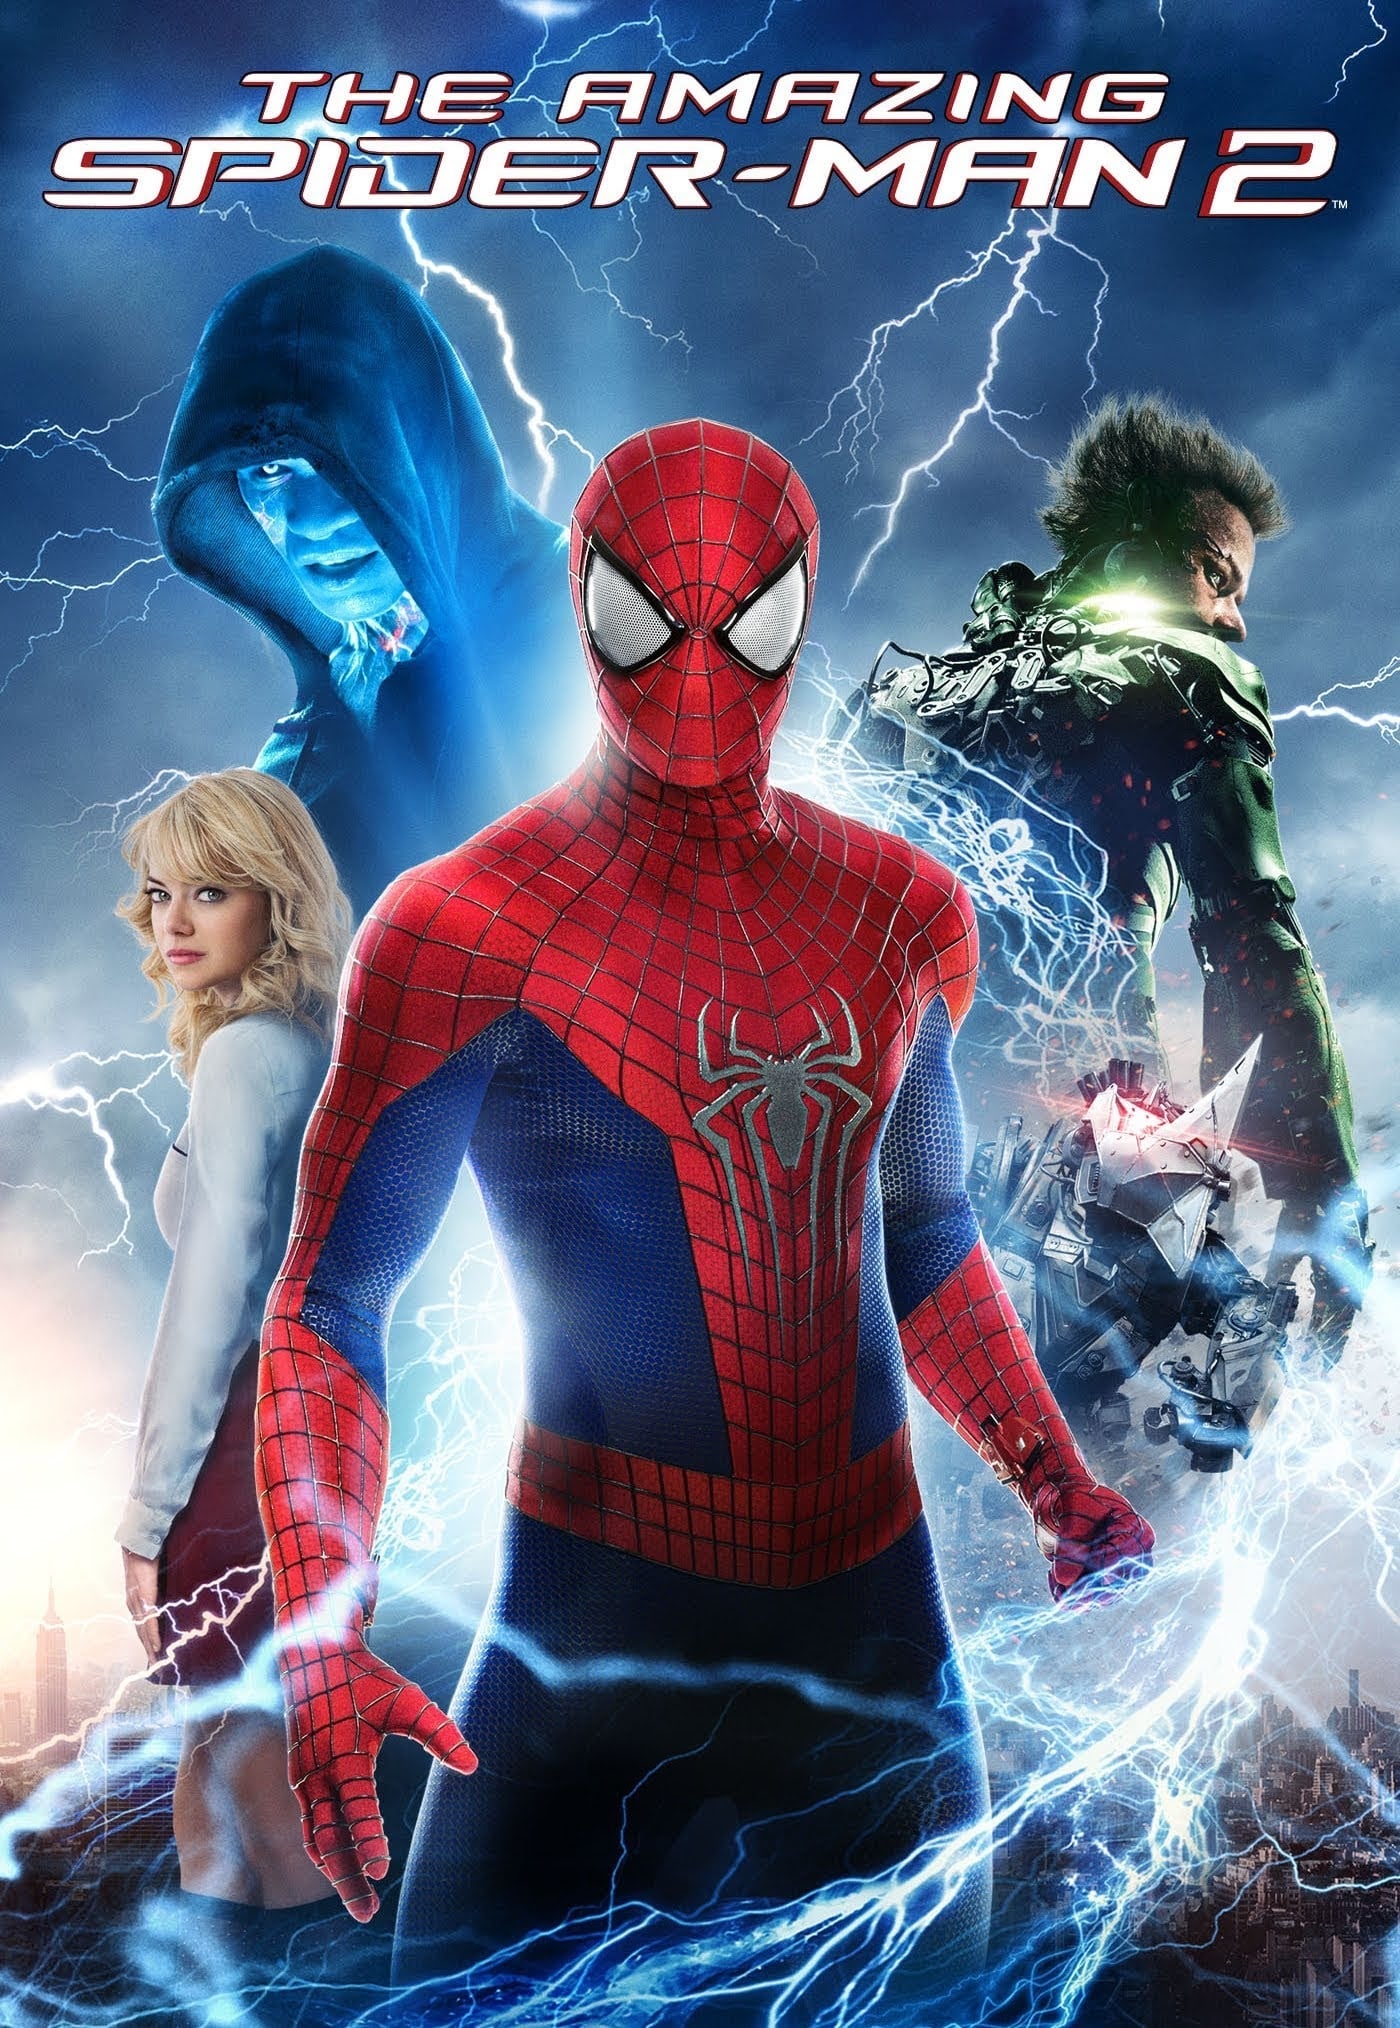 Movie poster with Spiderman, girlfriend and twi villains